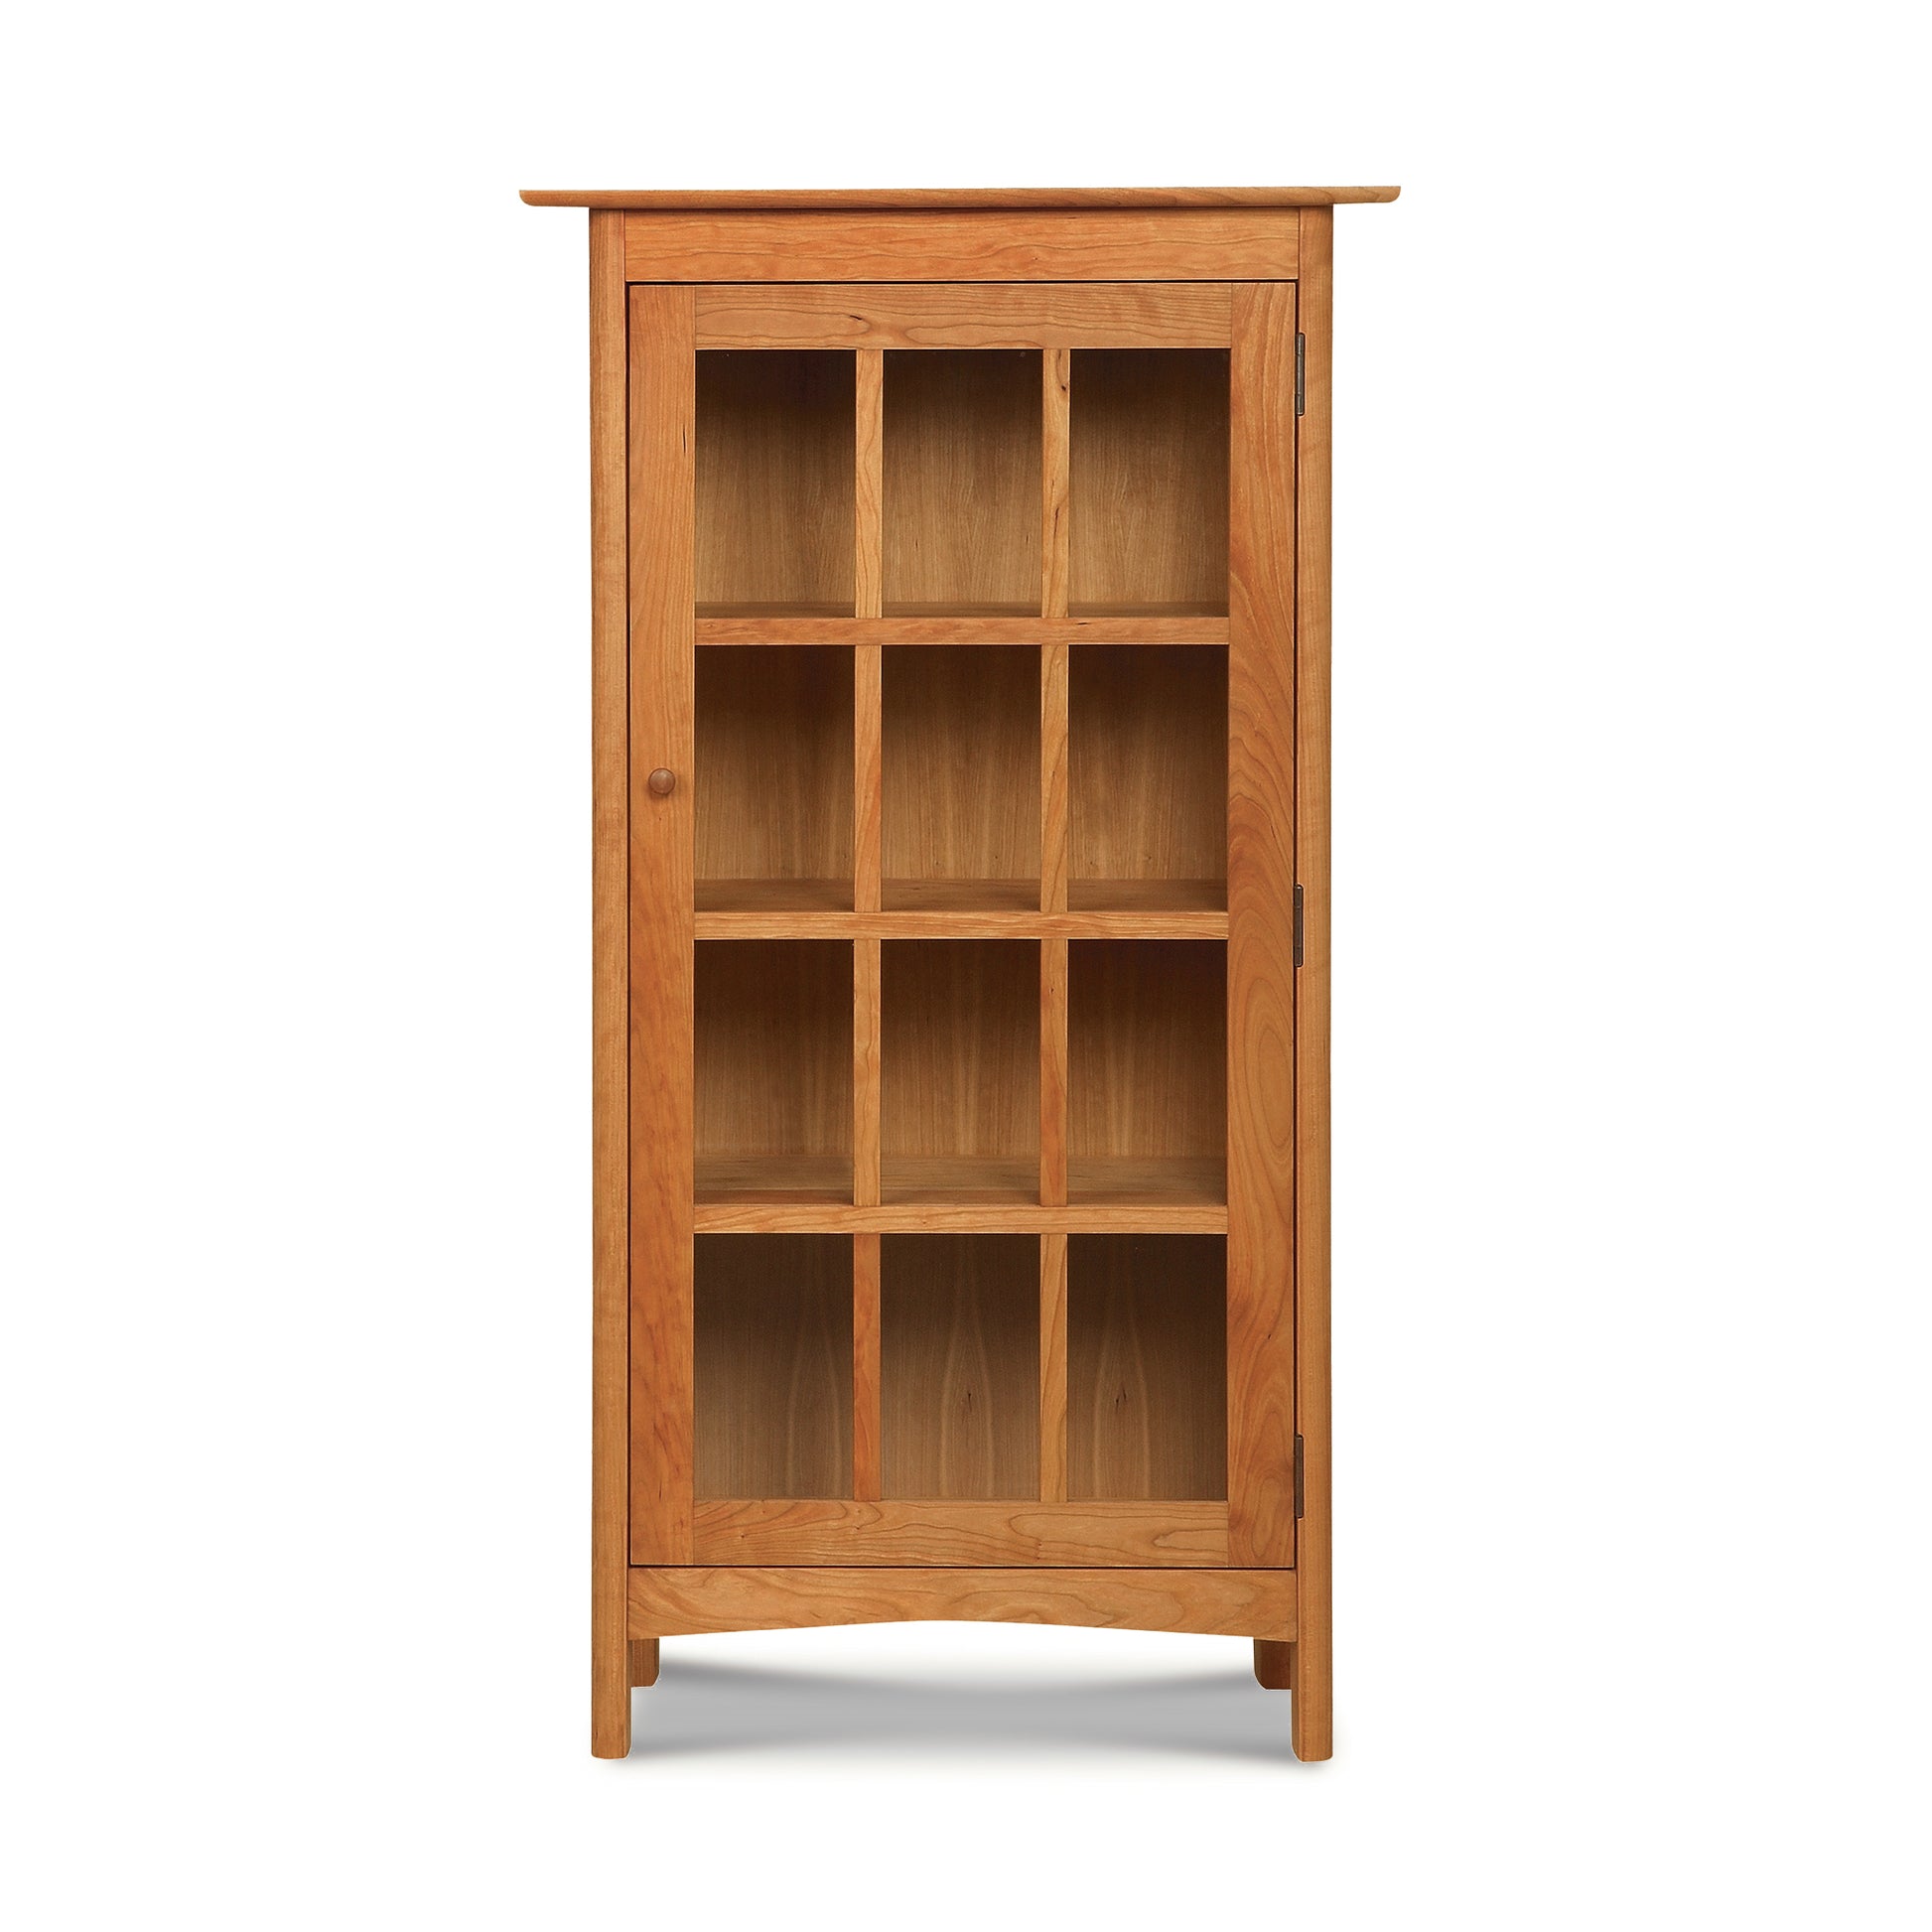 Heartwood Shaker Glass Door Bookcase from Vermont Furniture Designs, isolated on a white background.